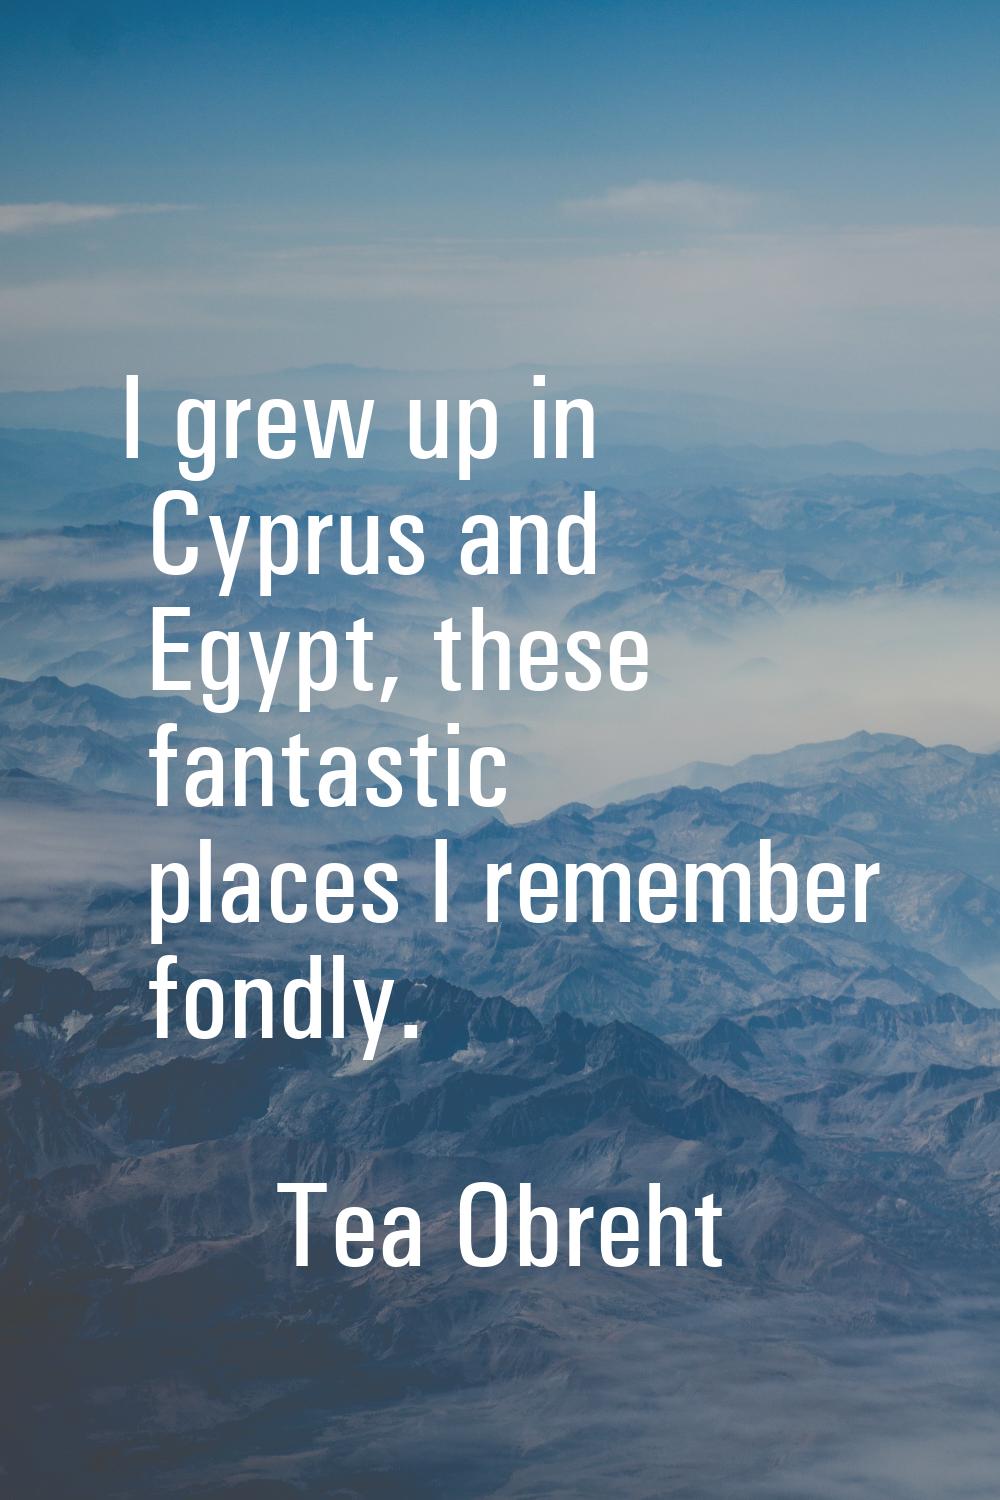 I grew up in Cyprus and Egypt, these fantastic places I remember fondly.